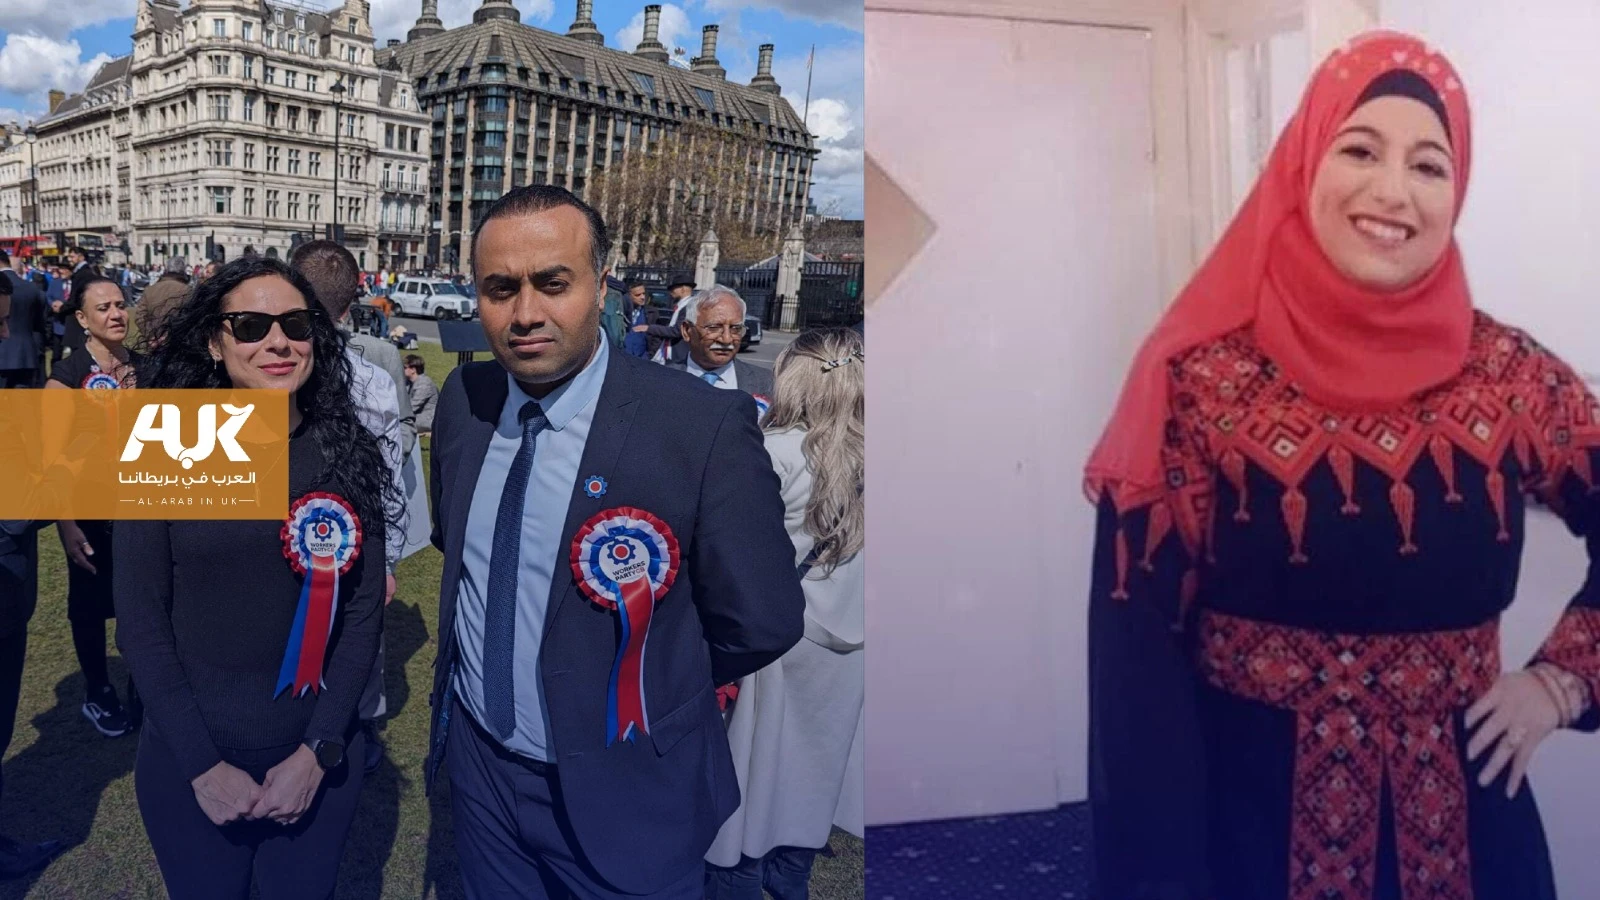 Taghrid Al-Mawed and Nada Jarche Two Arab Candidates for the British Parliament